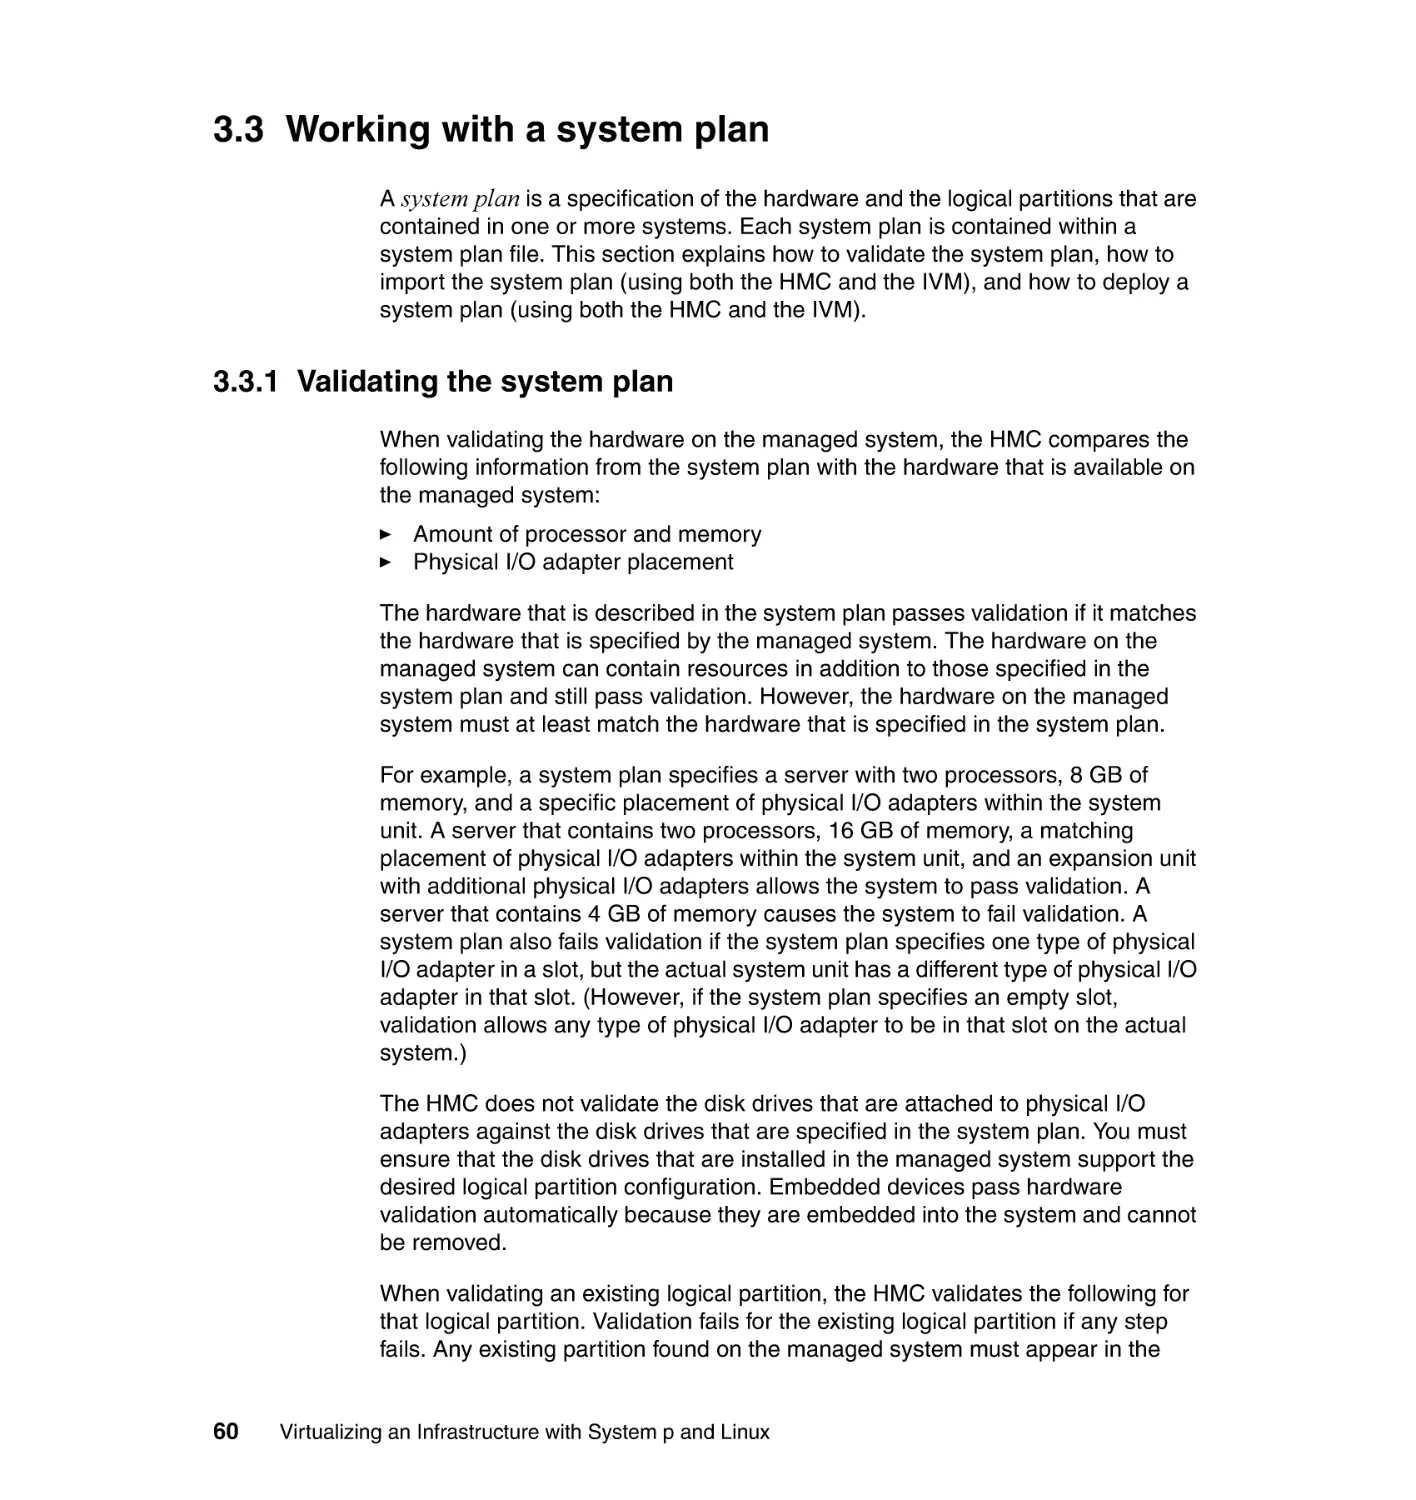 3.3 Working with a system plan
3.3.1 Validating the system plan